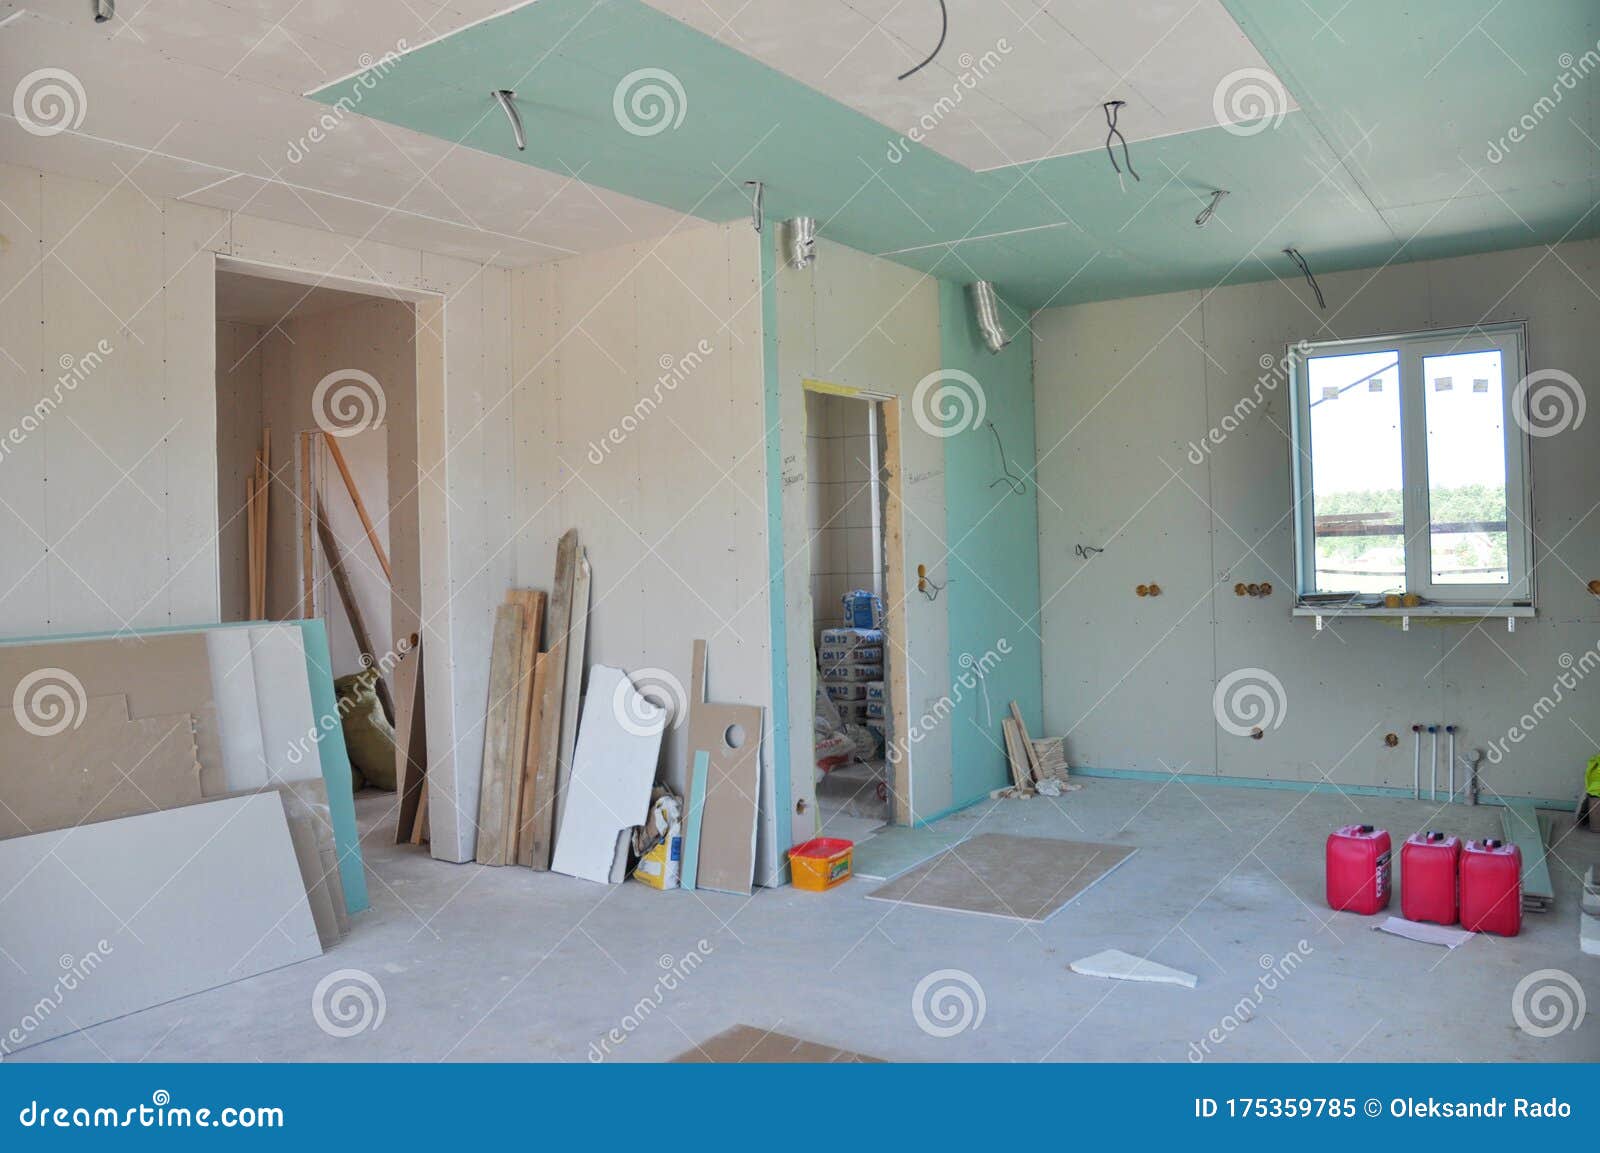 15,100+ House Wall Painting Stock Photos, Pictures & Royalty-Free